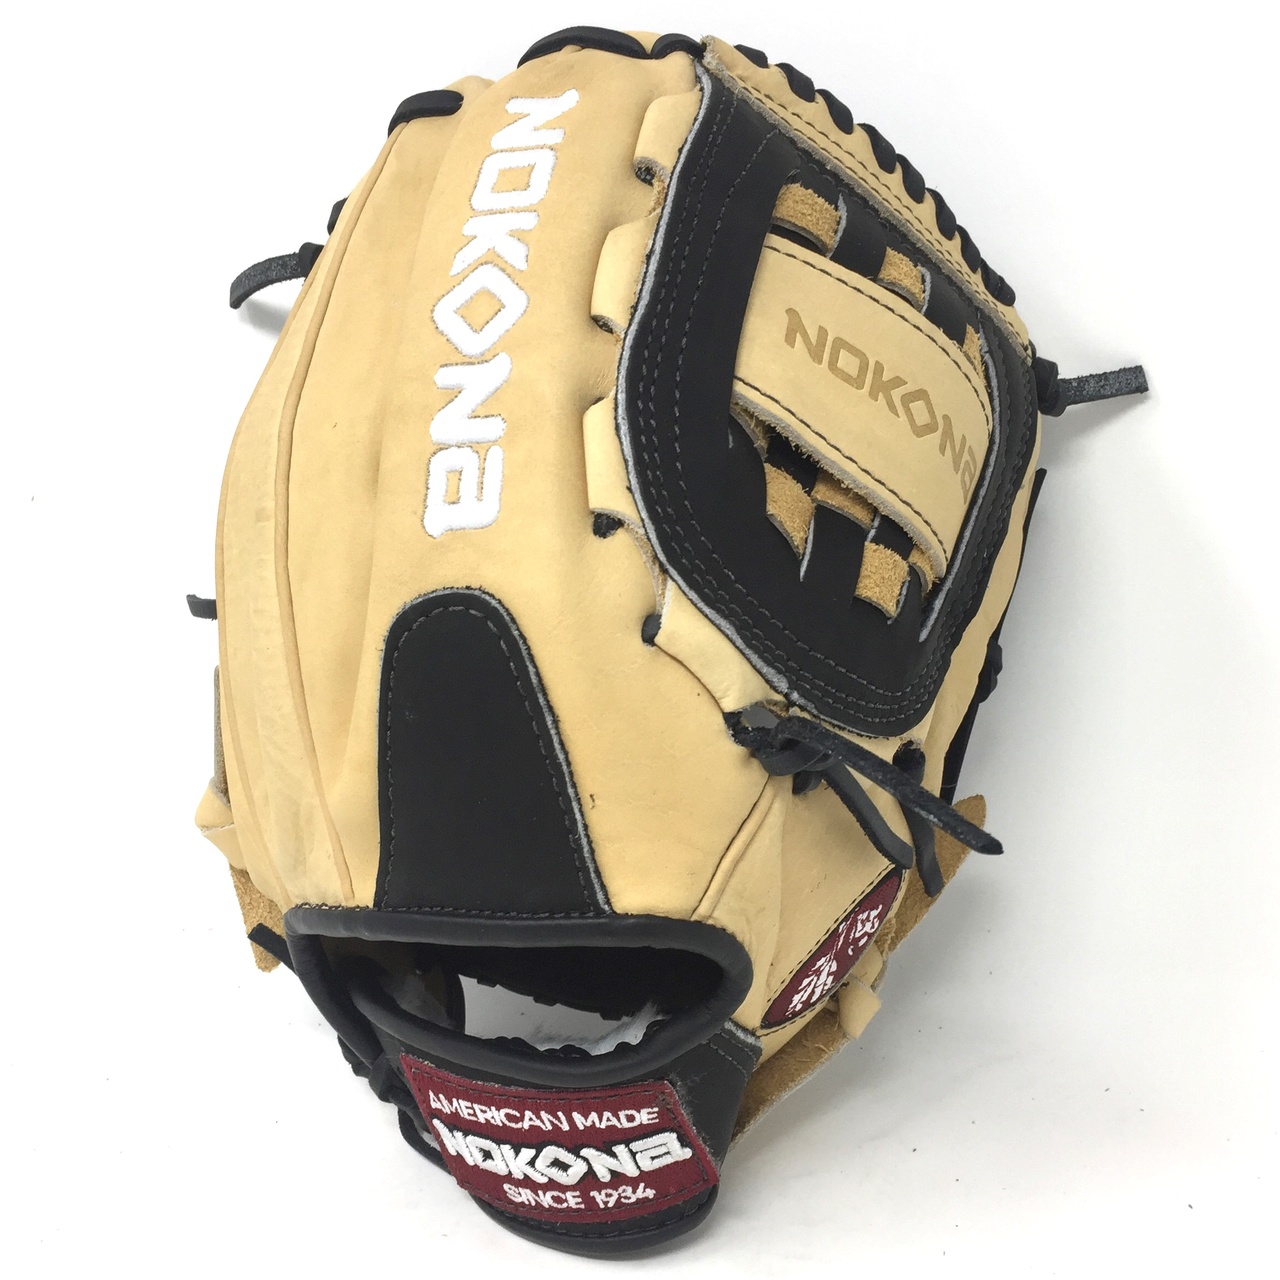 nokona-12-inch-bison-black-alpha-baseball-glove-s-1200cb-right-hand-throw S-1200CB-RightHandThrow Nokona 808808893288 Young Adult Glove made of American Bison and Supersoft Steerhide leather